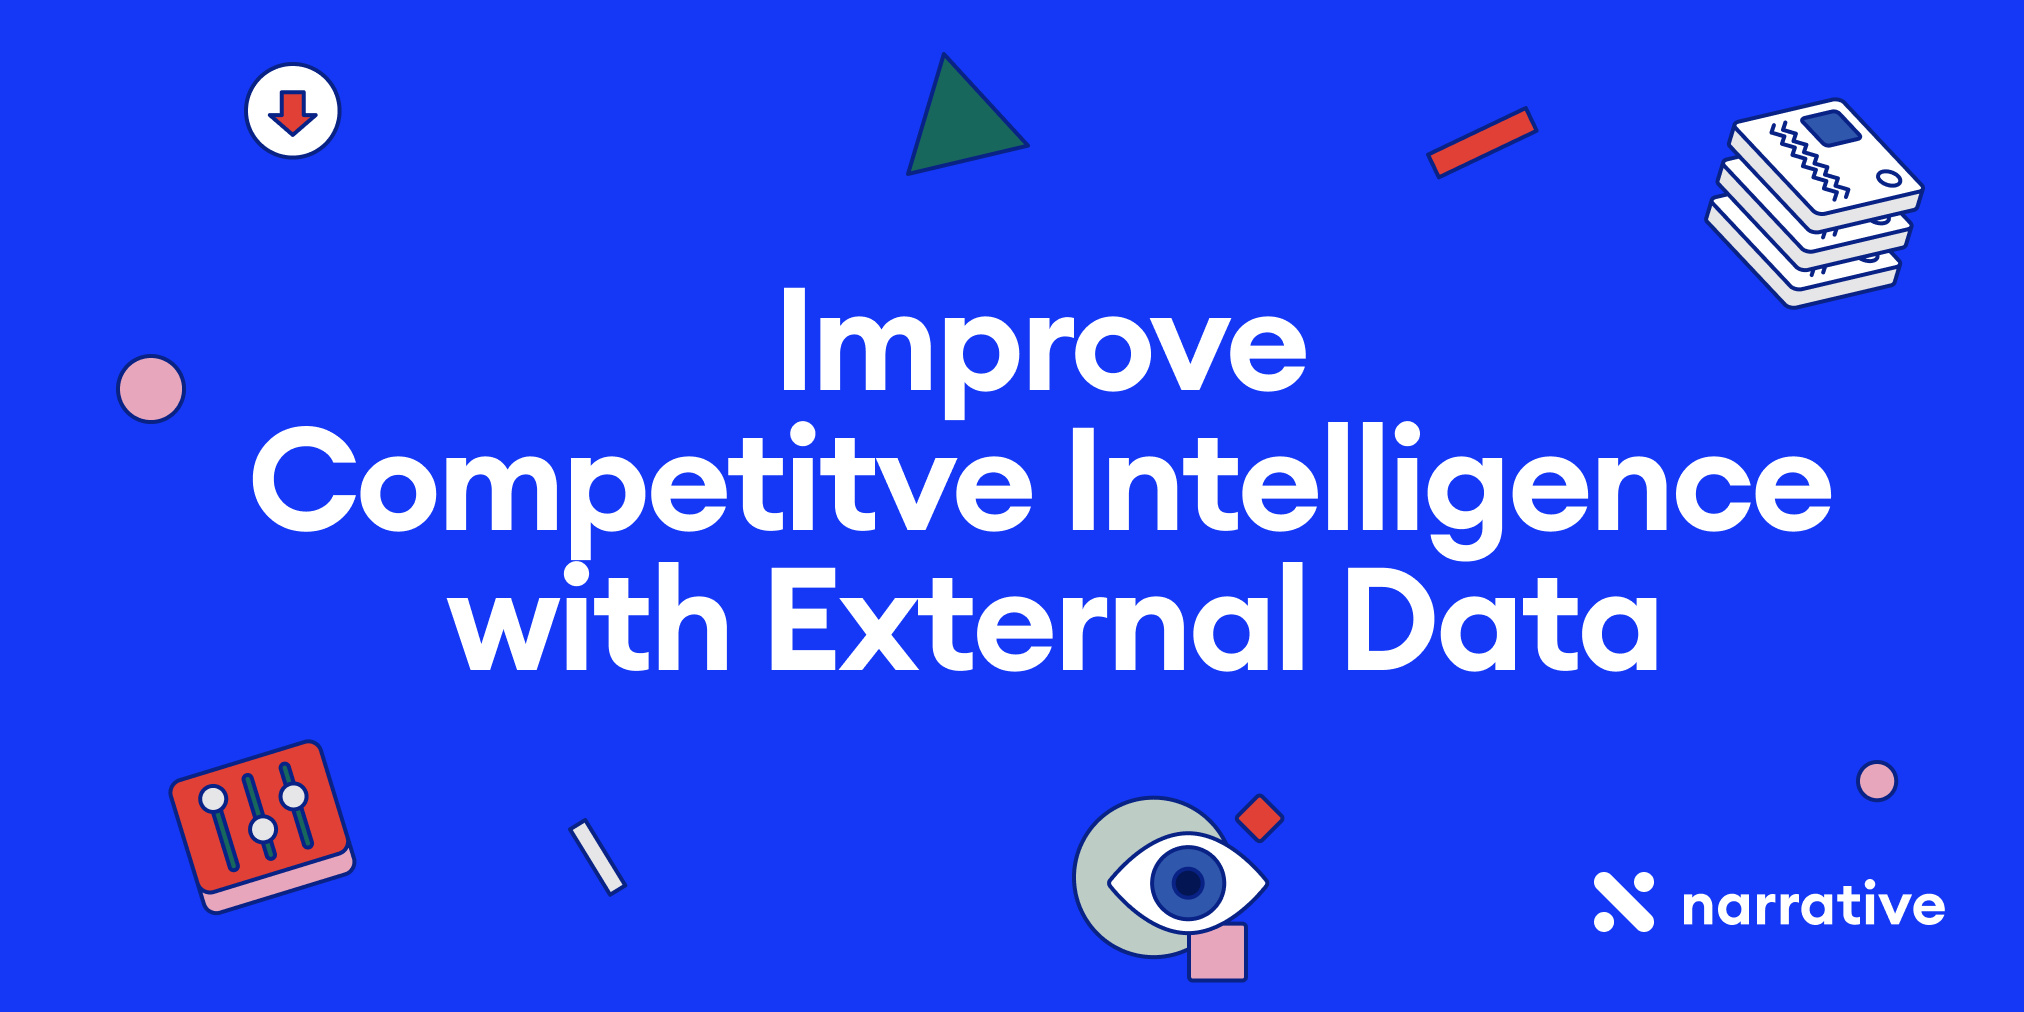 How to Use External Data to Improve Competitive Intelligence